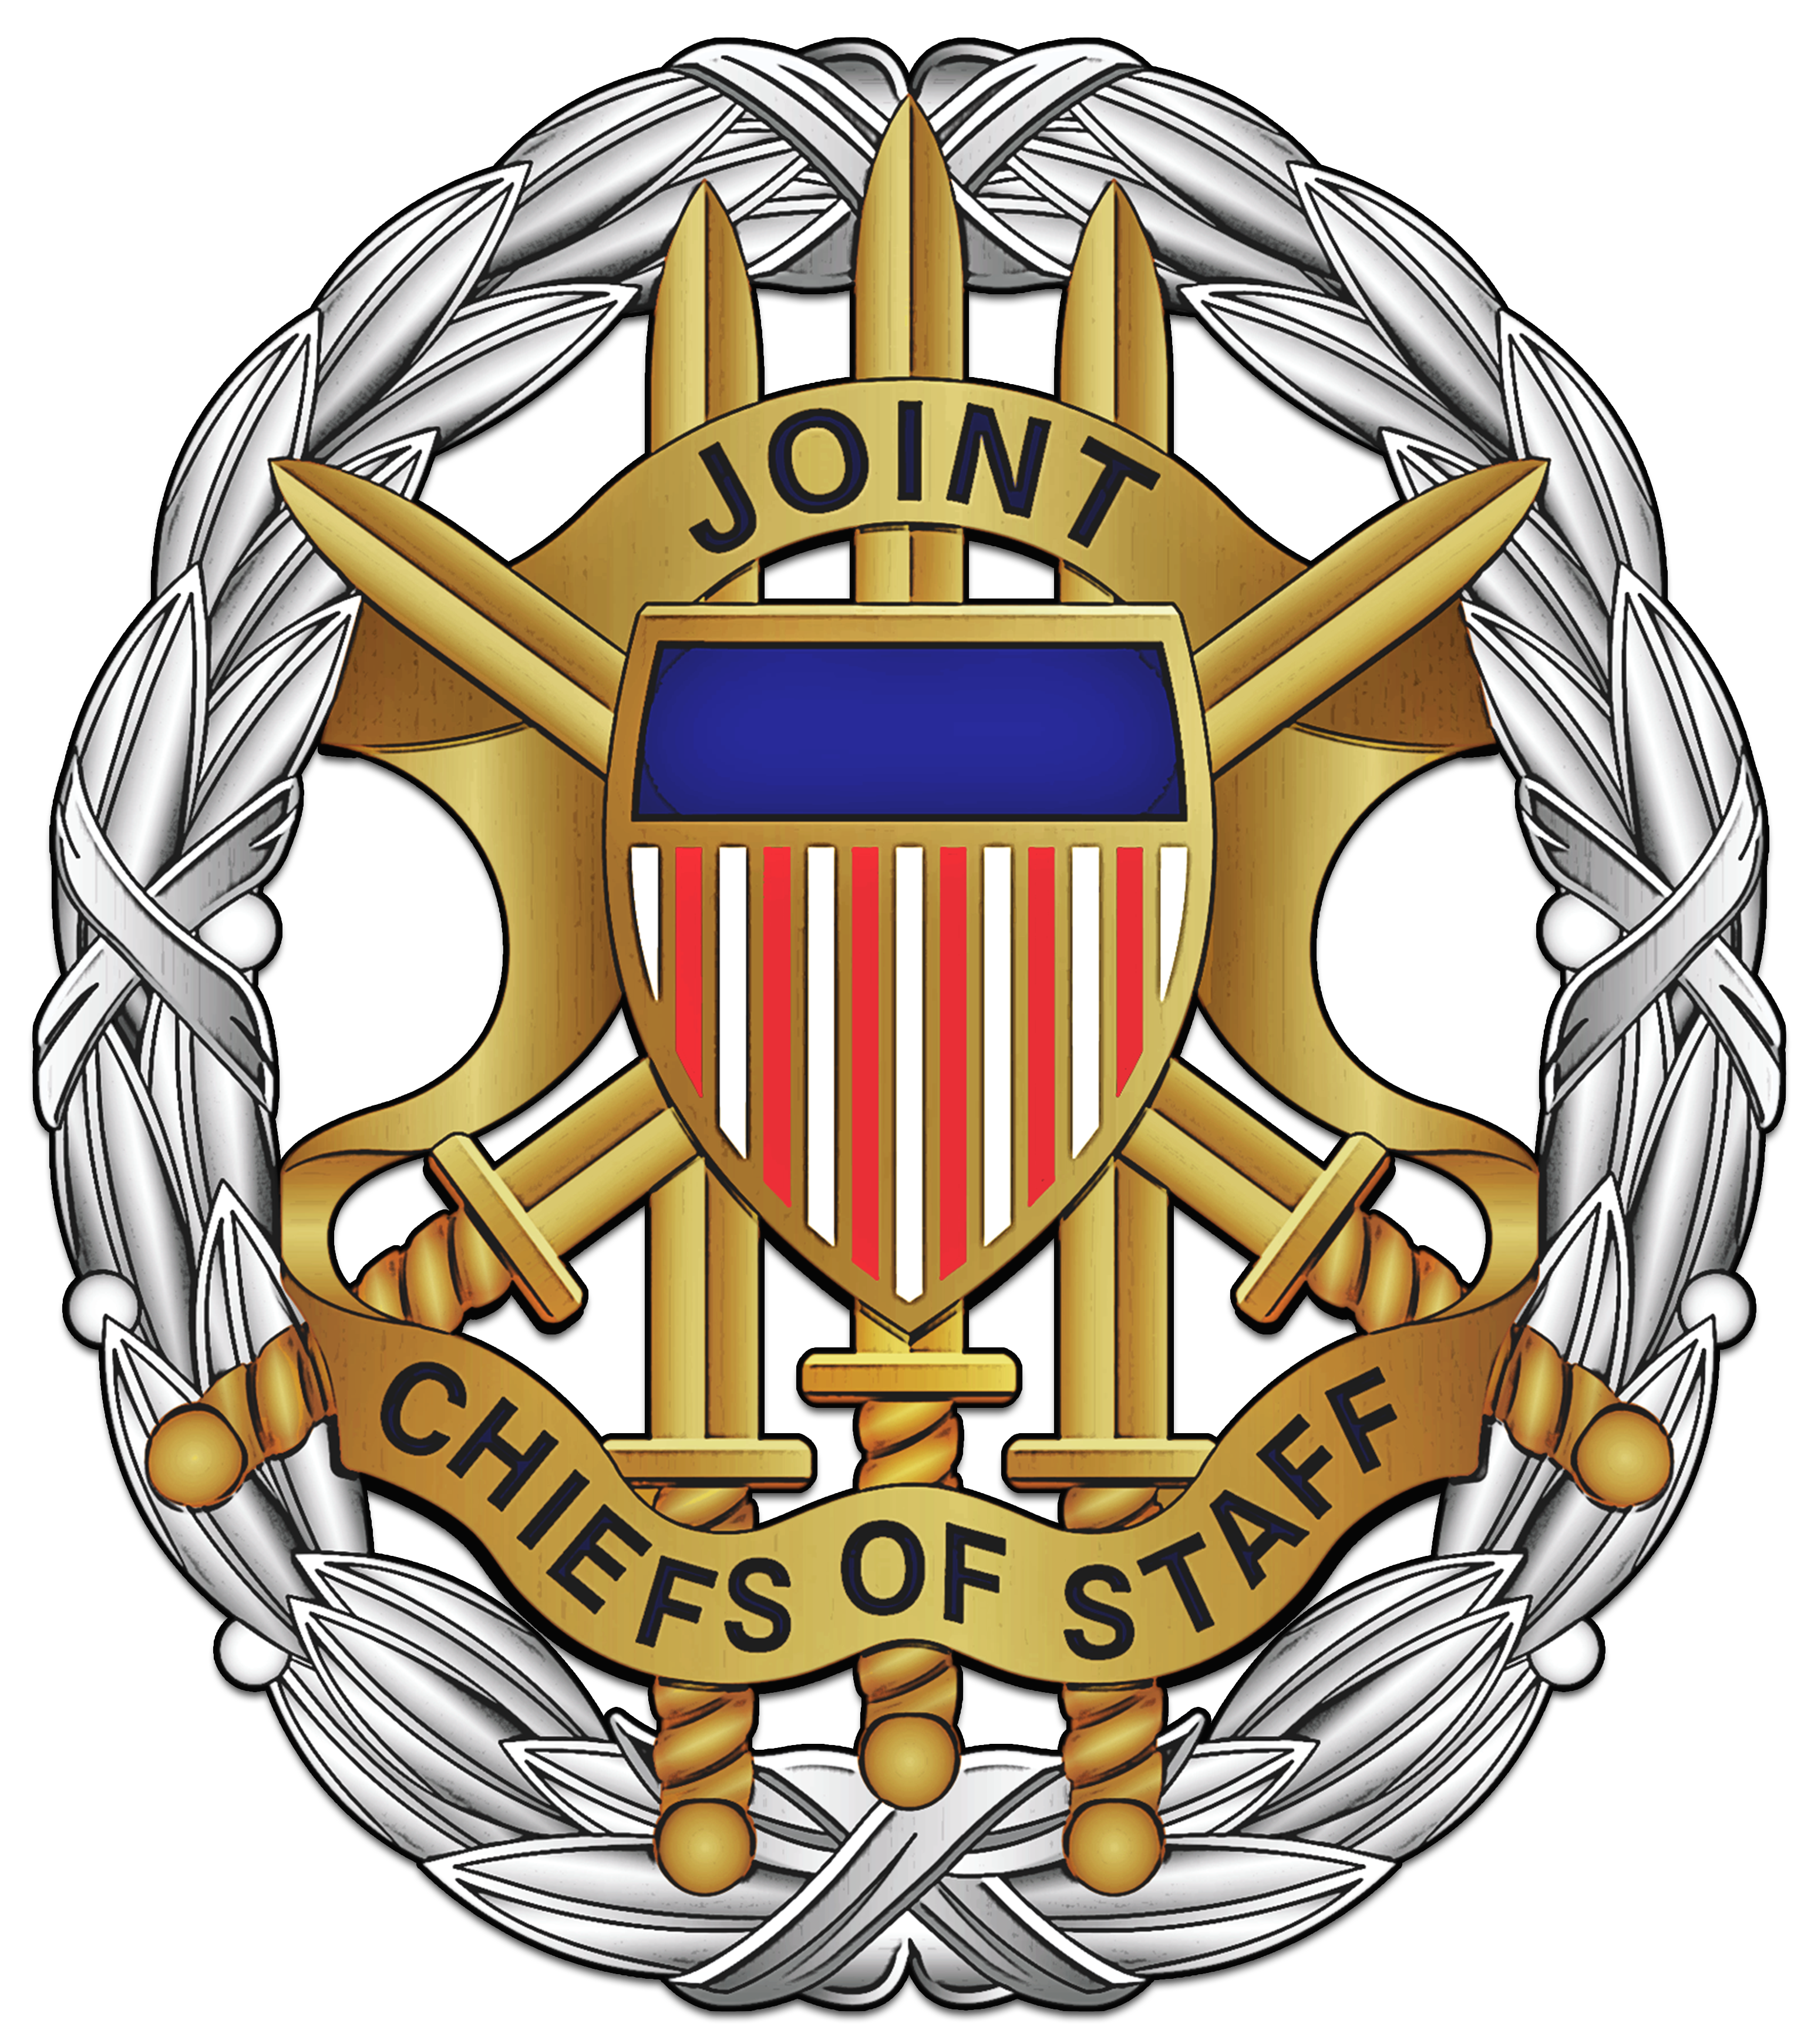 Image of Military or Affiliate Seal